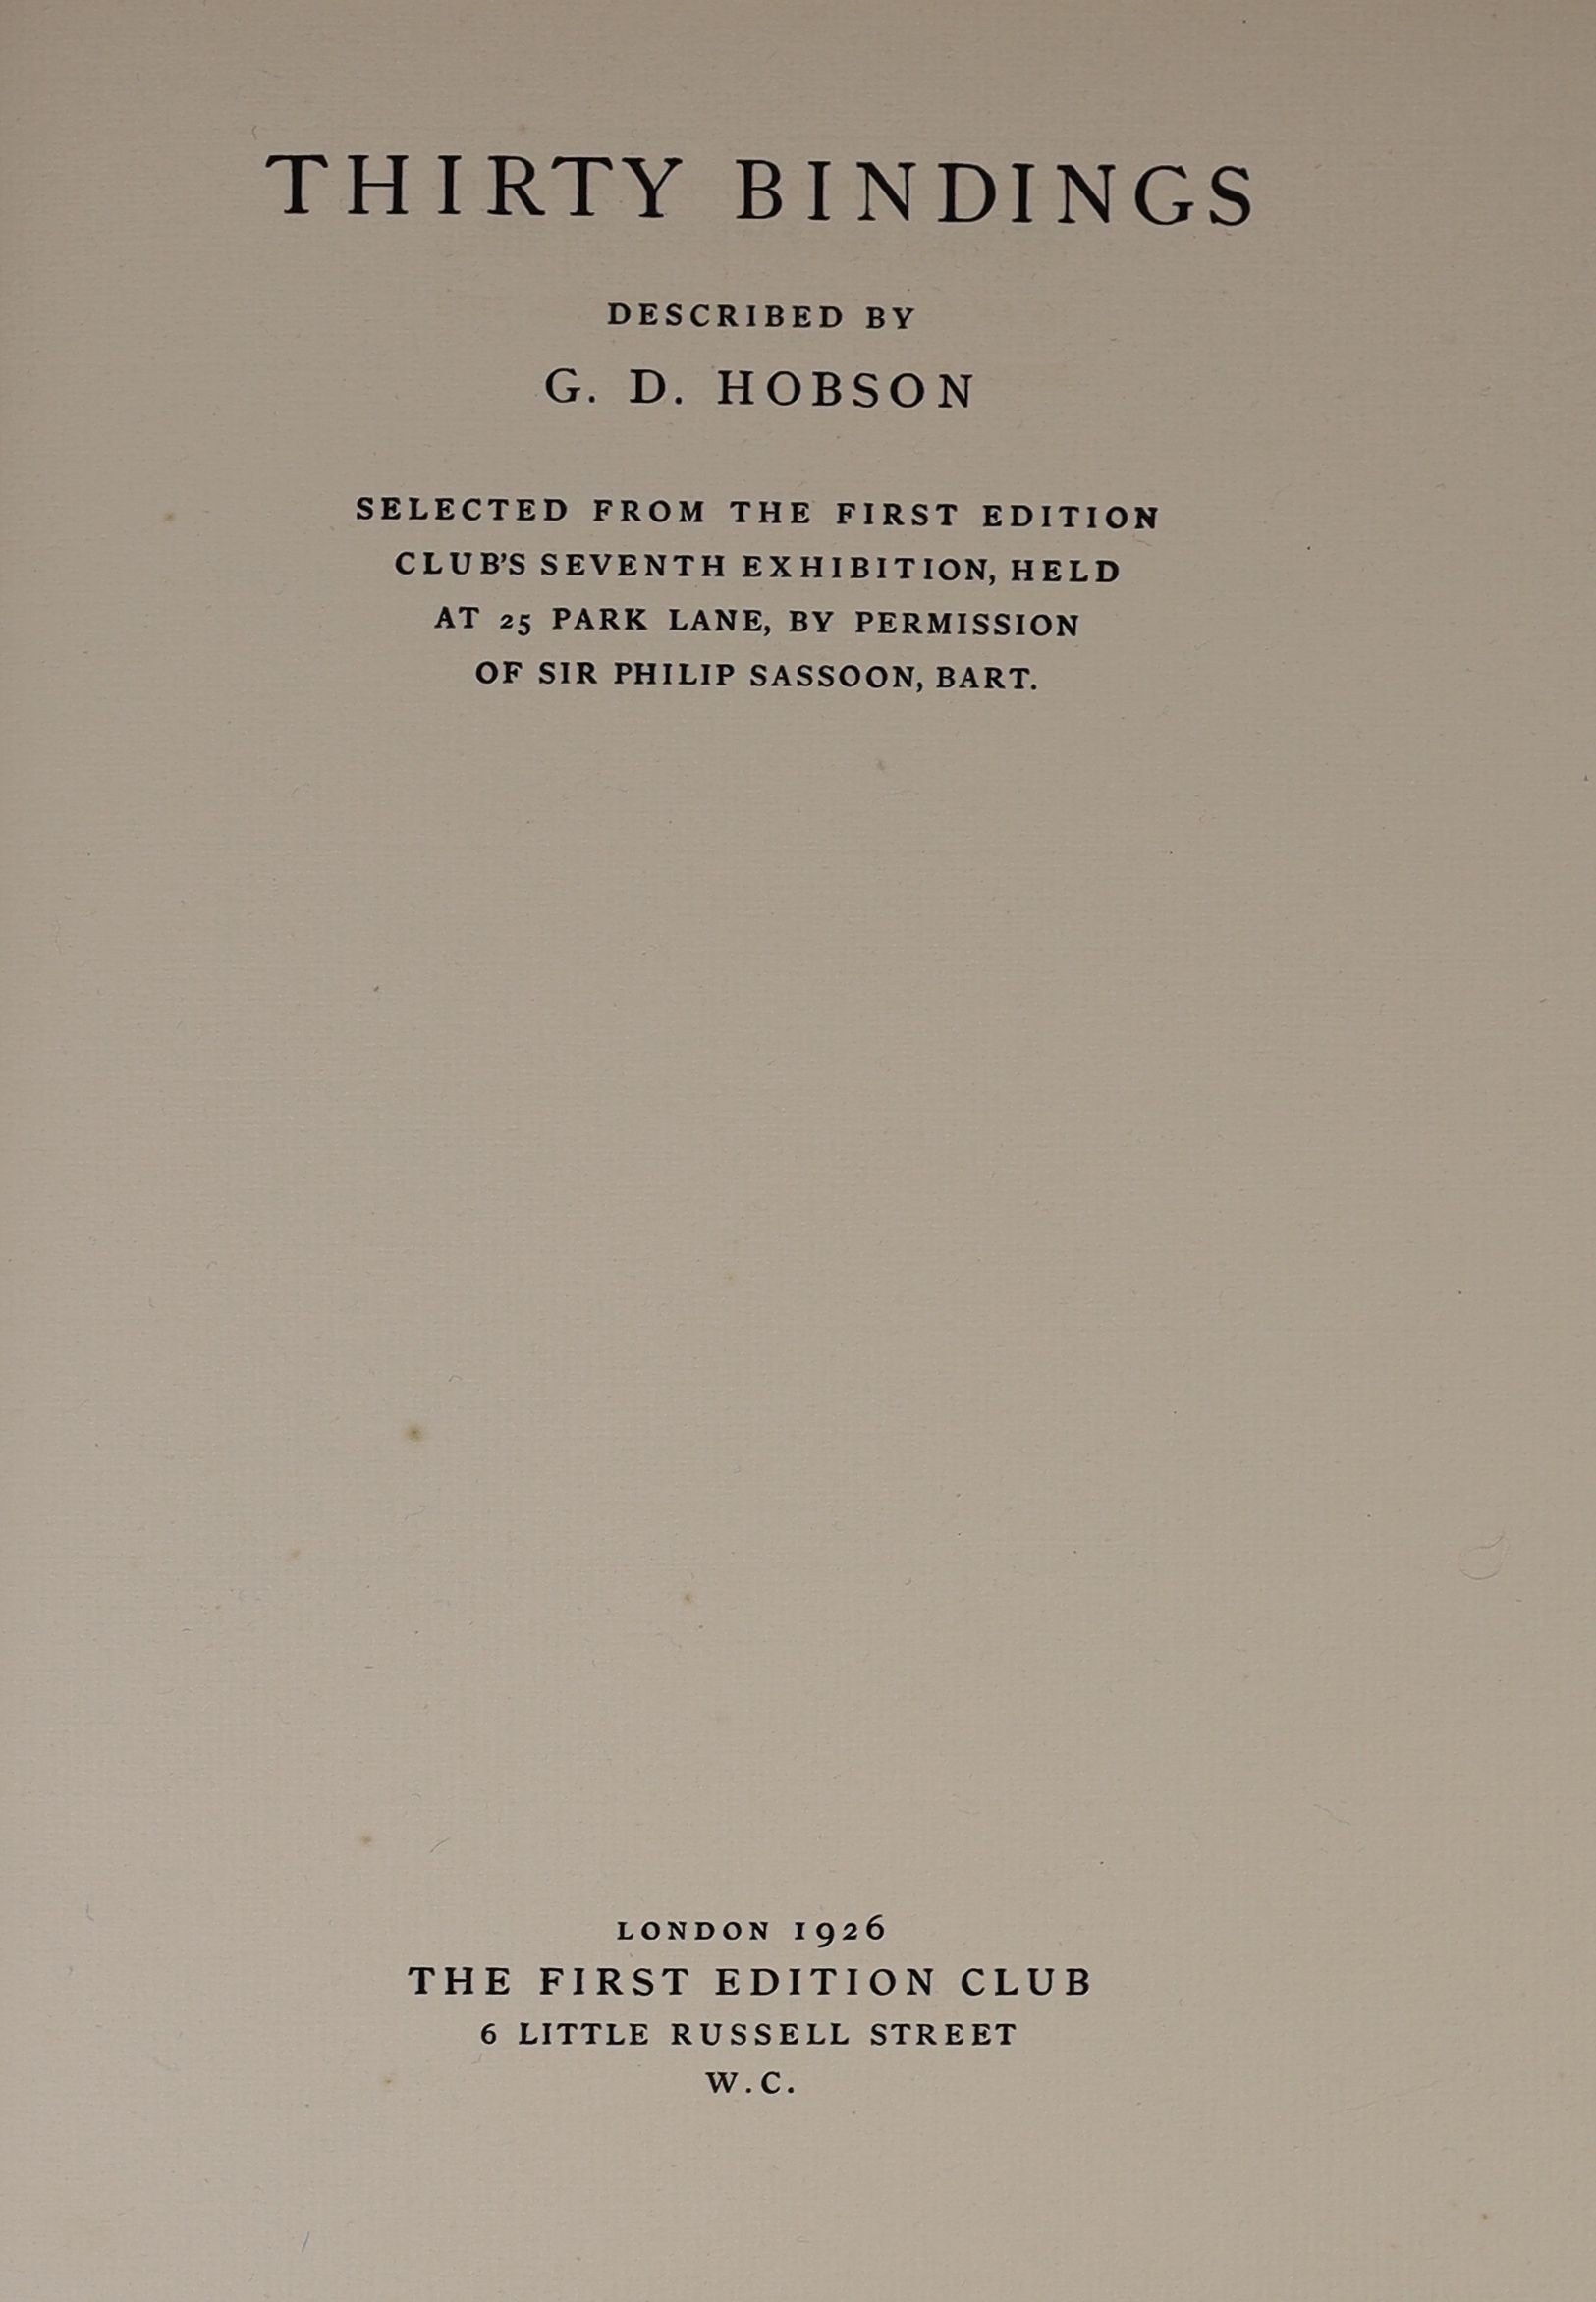 Hobson, Geoffrey D. - Thirty Bindings, one of 600, illustrated with 30 plates, 4to, original cloth, The First Editions Club, London, 1926